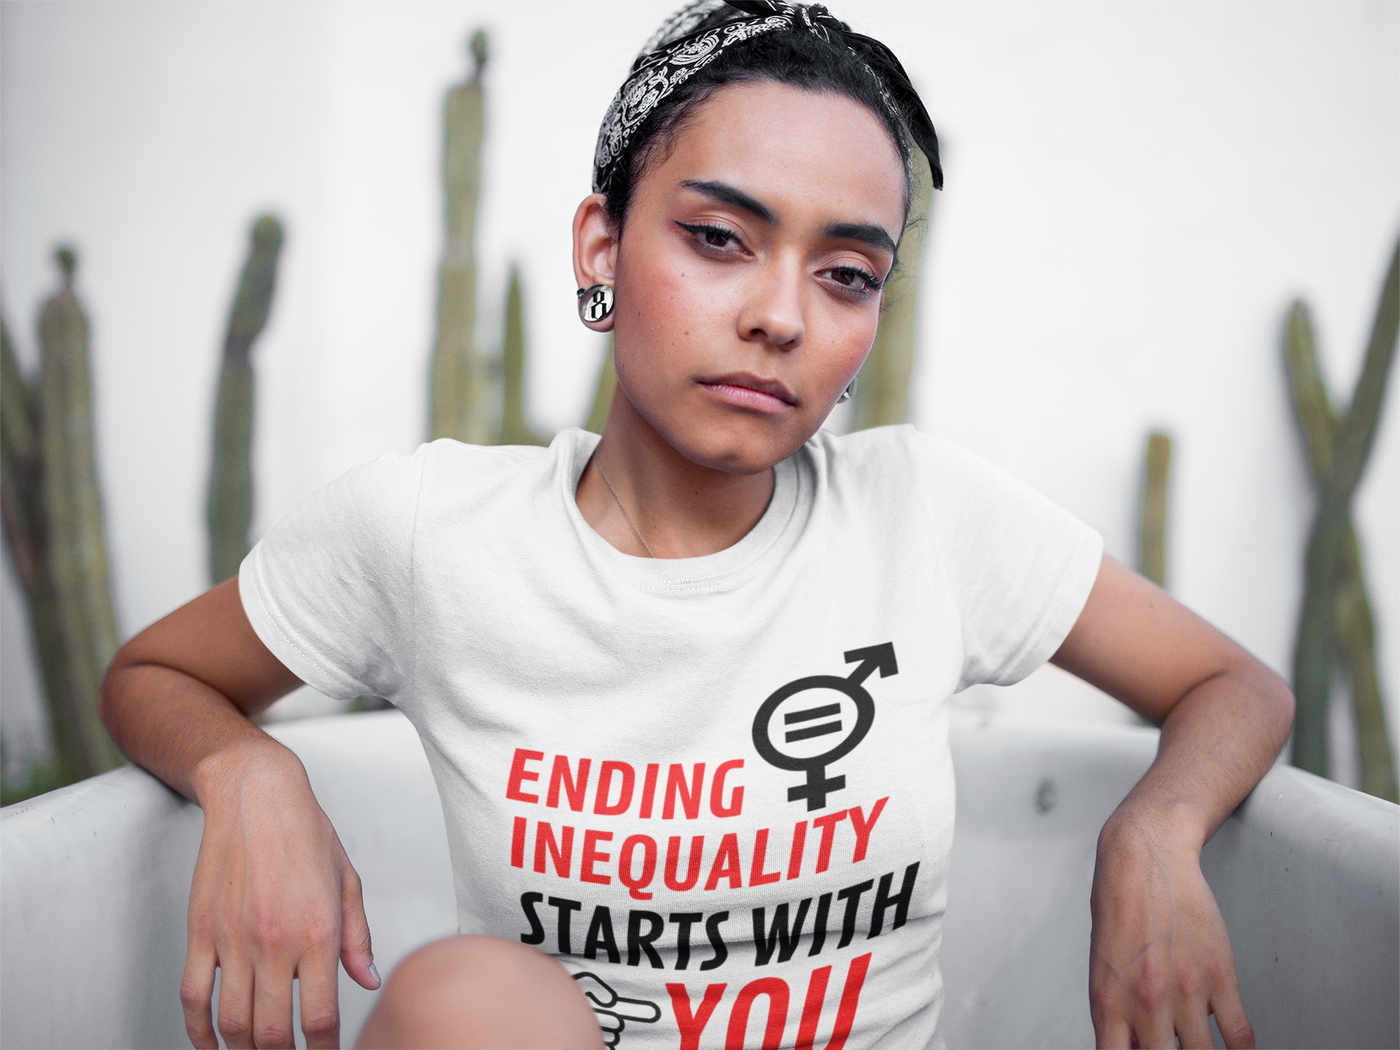 Ending Inequality Starts with You Tee